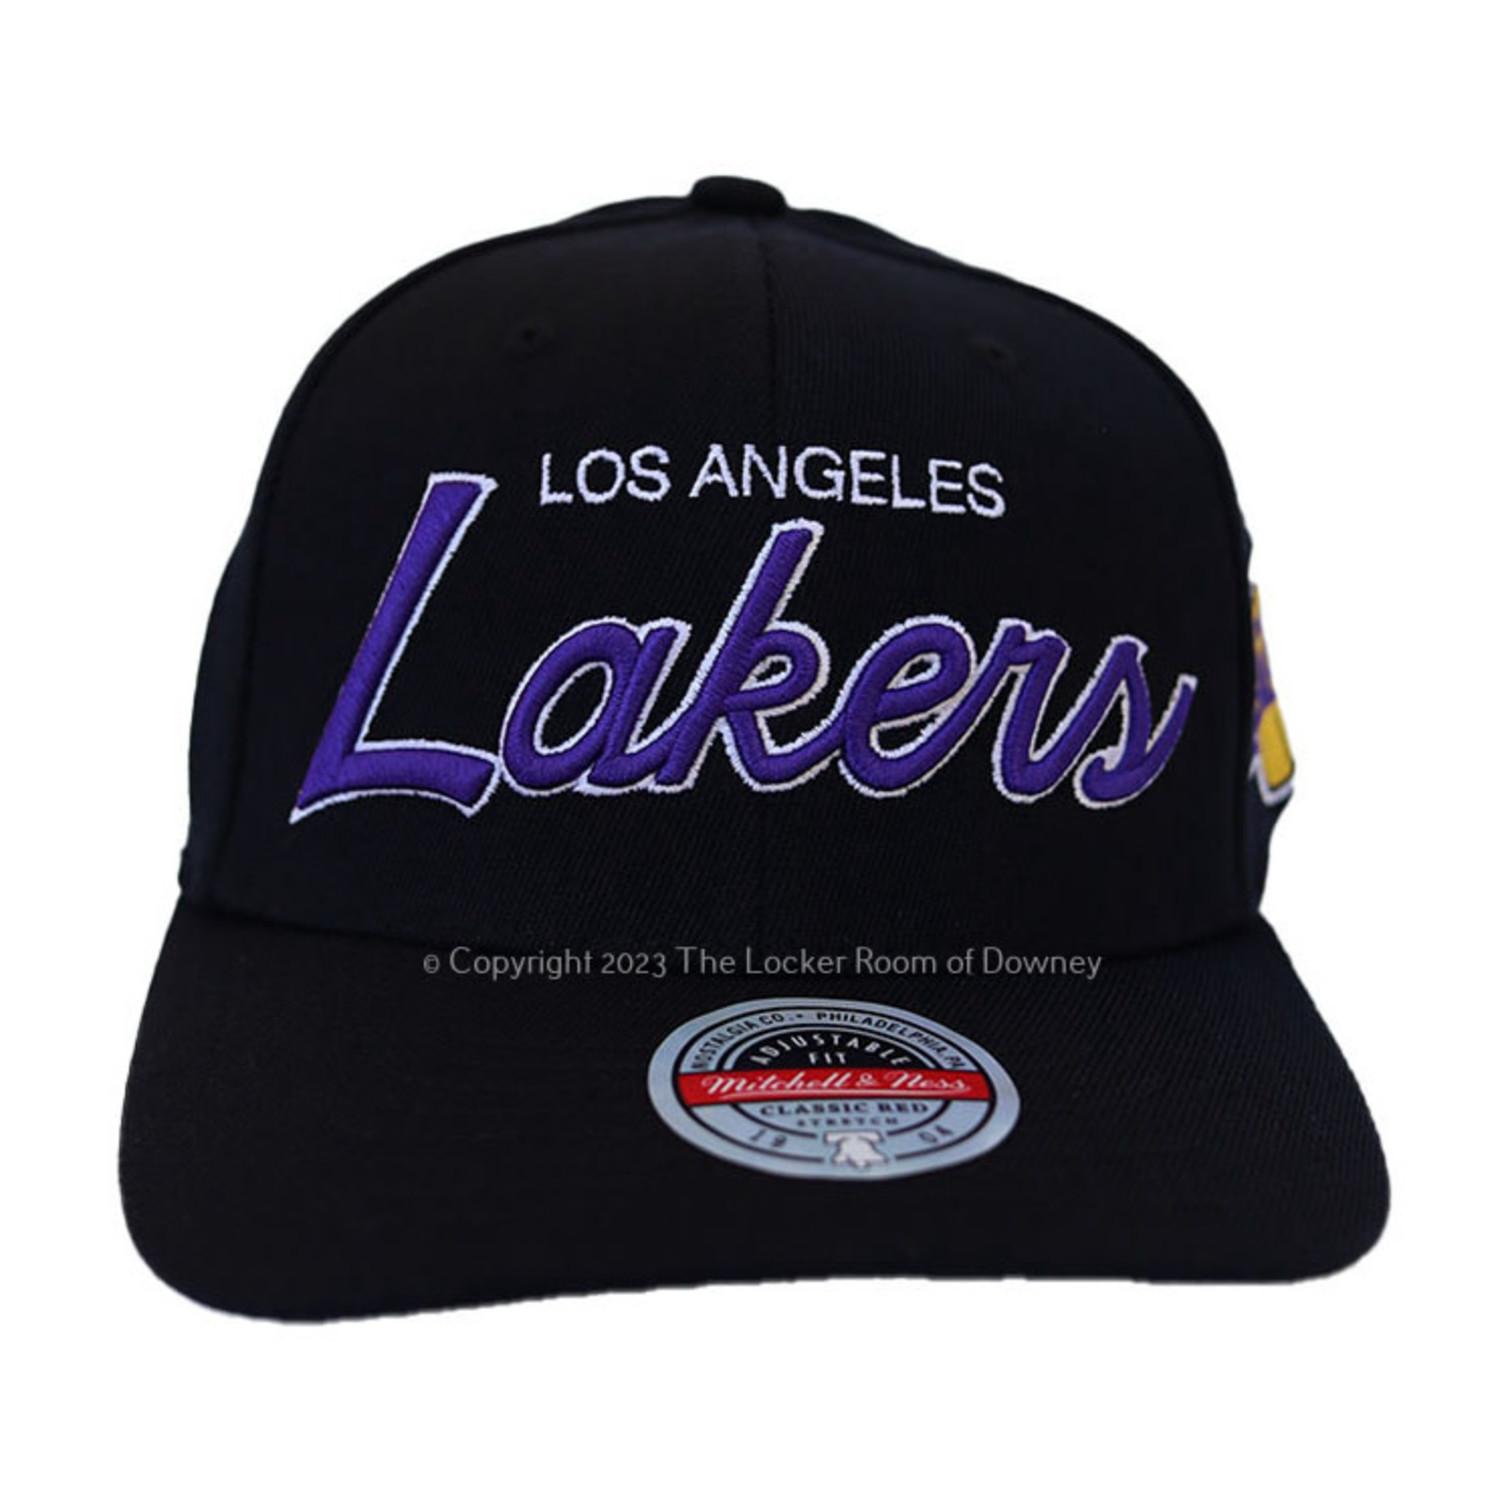 Mitchell and Ness - The Locker Room of Downey